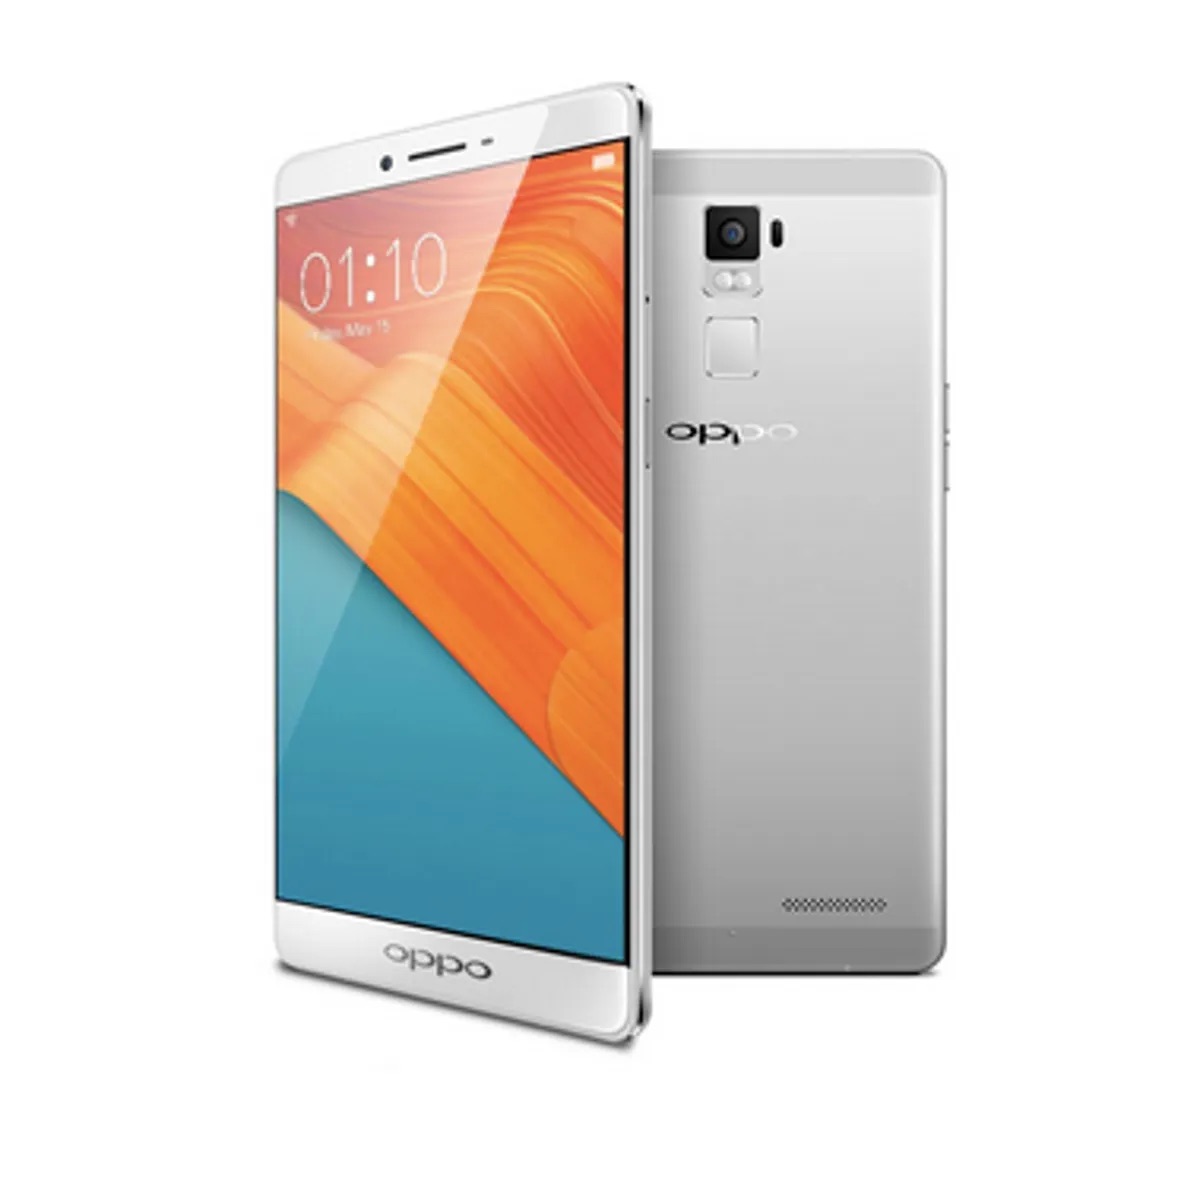 oppo-r7-and-r7-plus-news-rumors-features-release